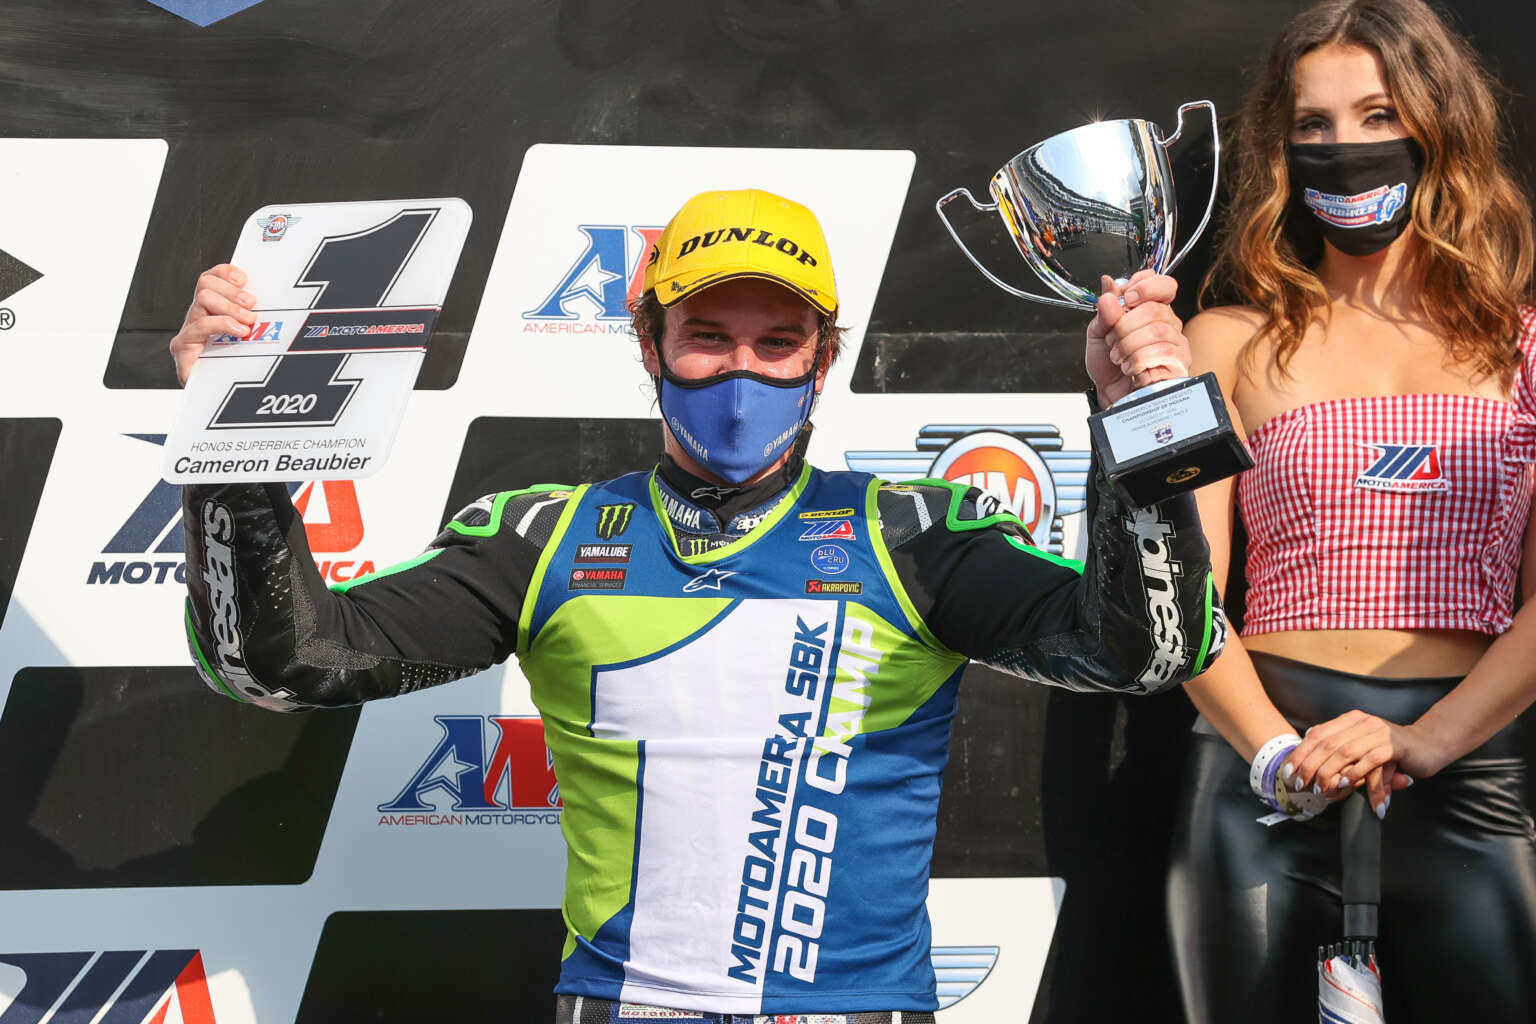 CAMERON BEAUBIER WINS FIFTH AMA SUPERBIKE CHAMPIONSHIP AT INDIANAPOLIS MOTOR SPEEDWAY